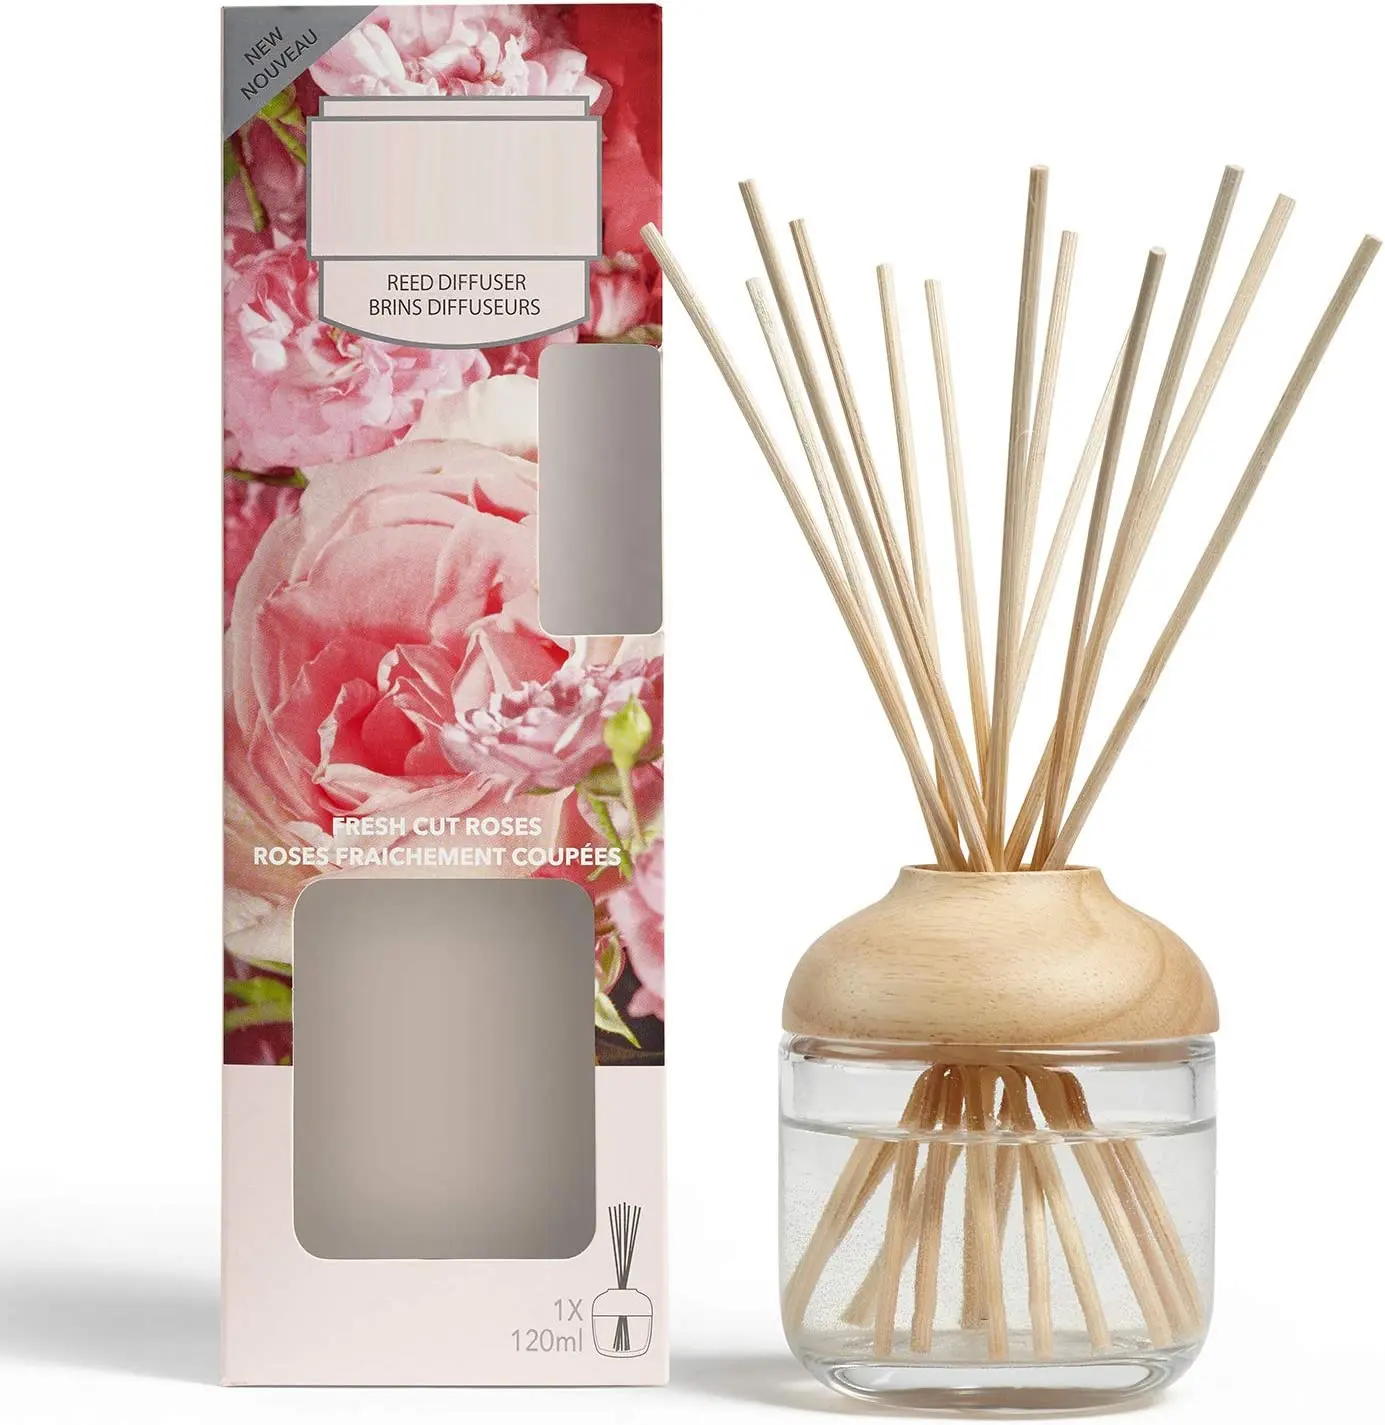 Ideal 120ml Fragrance Oil True-to-life Fragrance Roses Reed Diffuser Wedding With 12 Natural Rattan For Bathrooms Offices